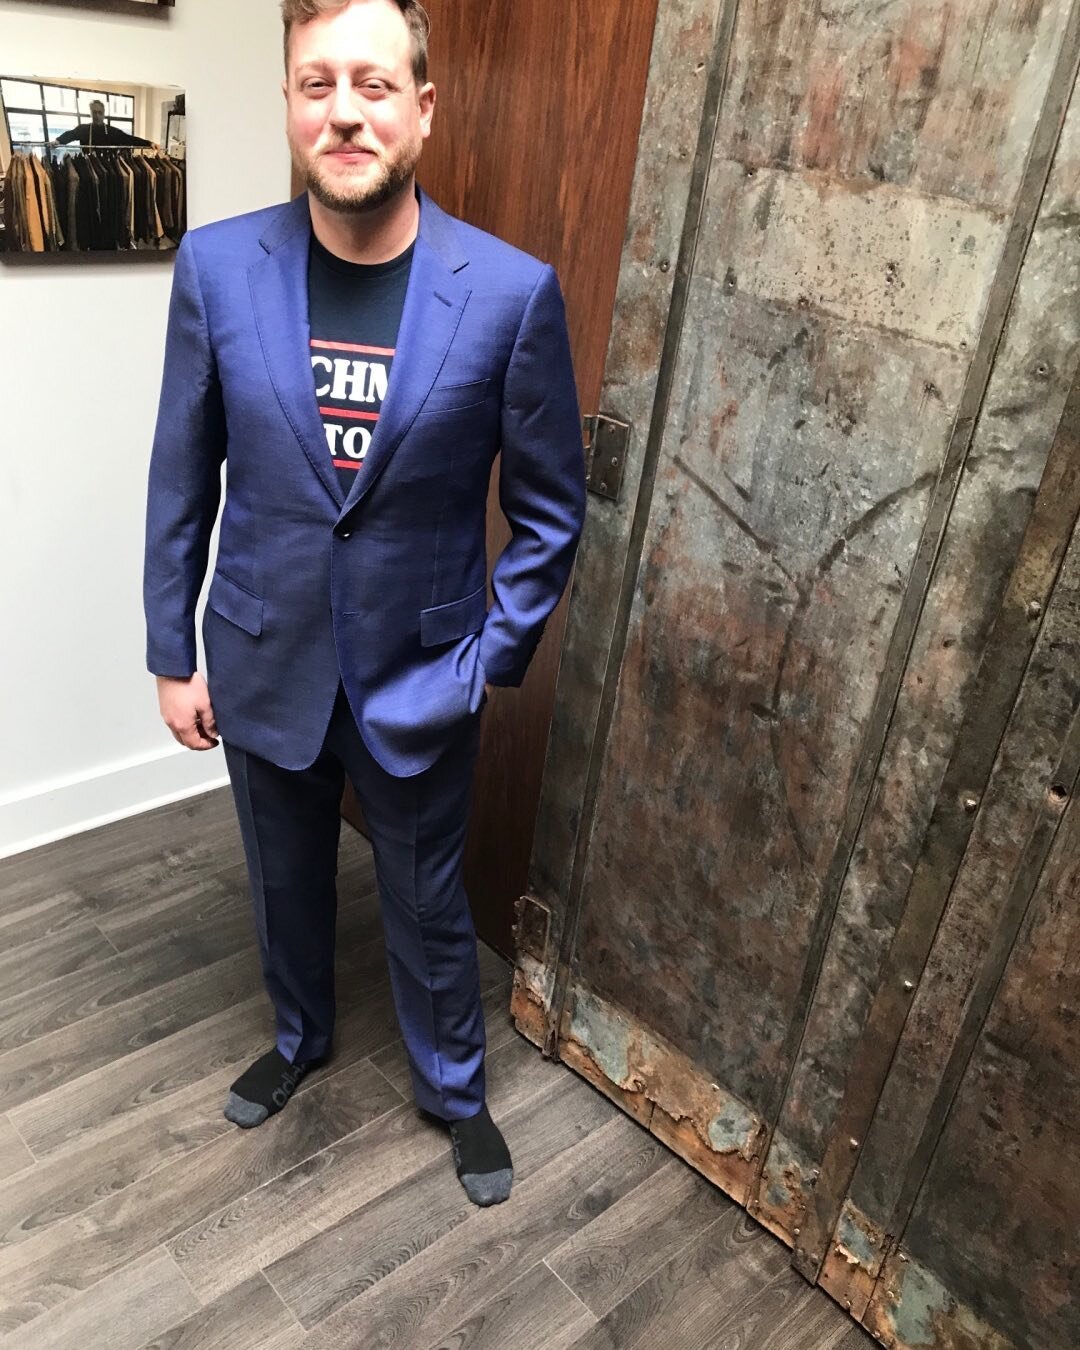 Our friend Frank looking very comfortable in his new suit.  Frank is getting ready to go up north to his good friend&rsquo;s wedding  Enjoy👍